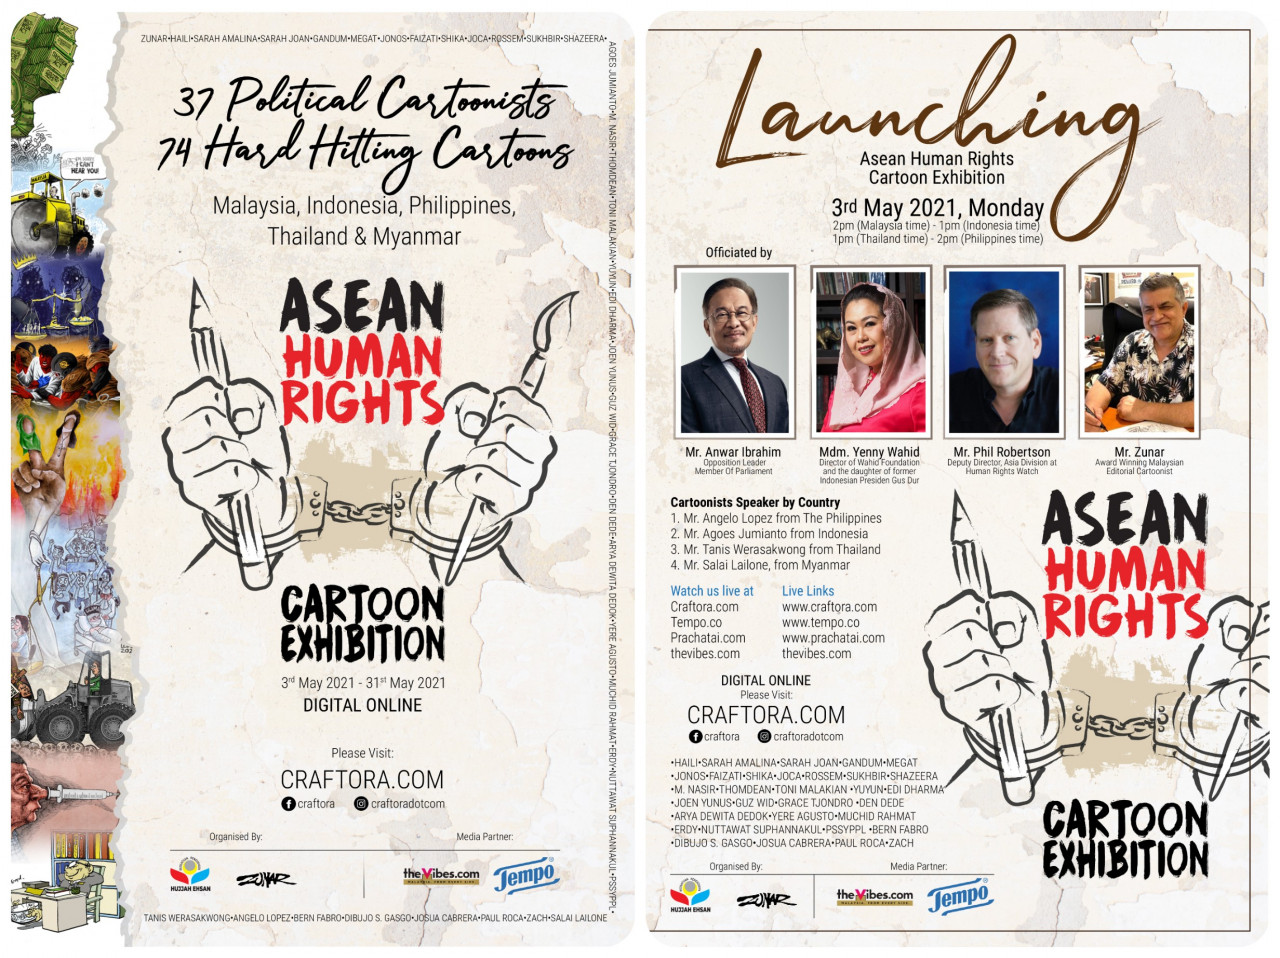 The launch will take place on May 3, 2021 with Datuk Seri Anwar Ibrahim attending to officiate the event. — Pic courtesy of Asean Human Rights Cartoon Exhibition committee.